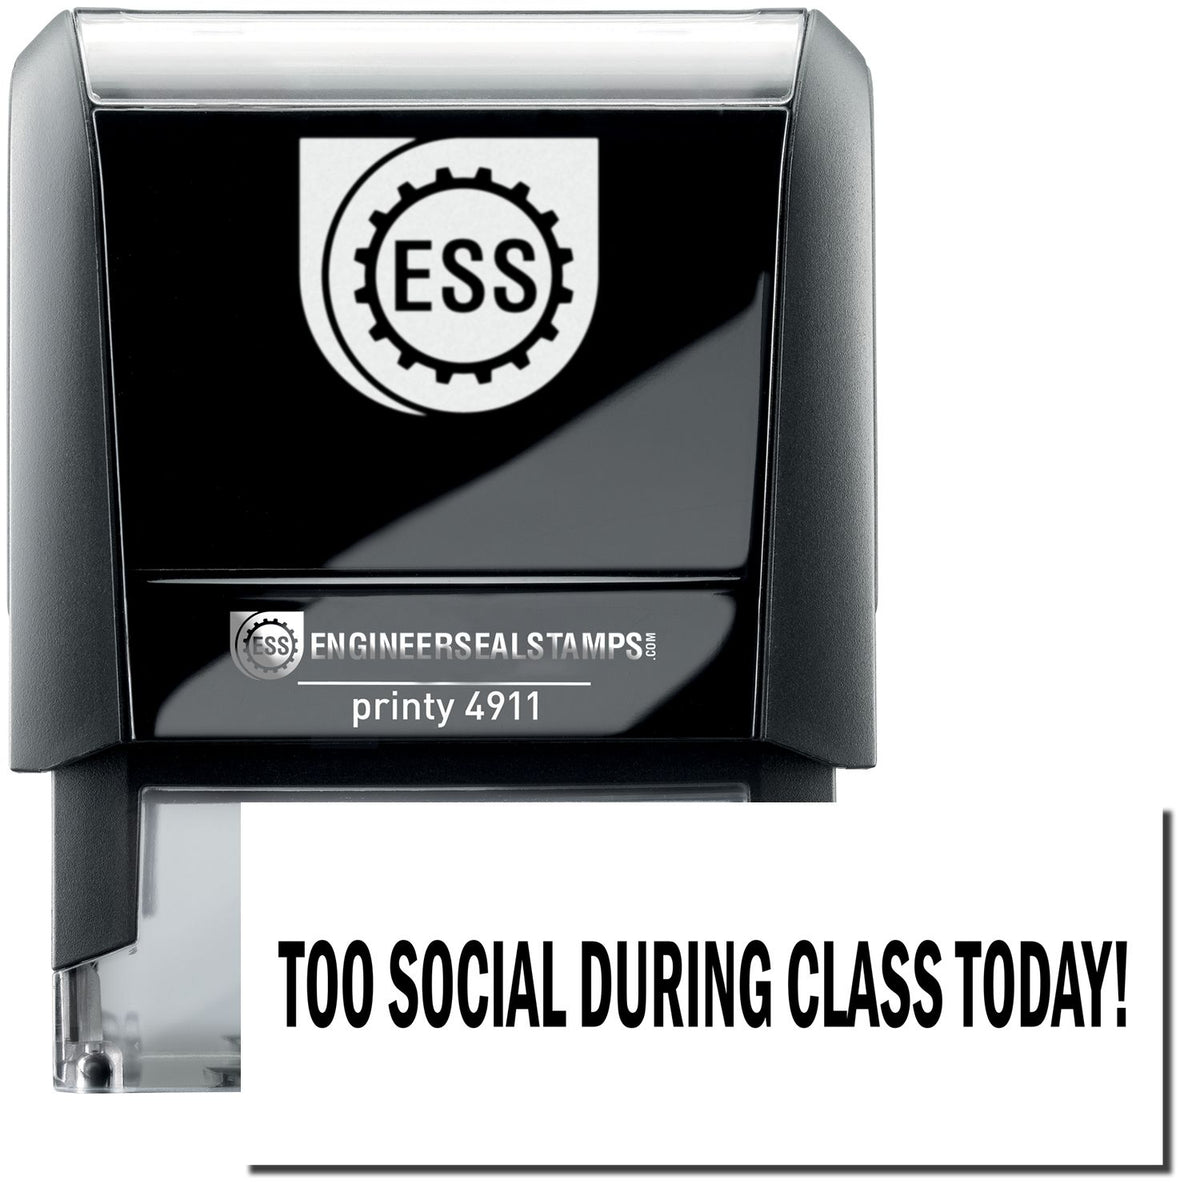 A self-inking stamp with a stamped image showing how the text &quot;TOO SOCIAL DURING CLASS TODAY!&quot; is displayed after stamping.